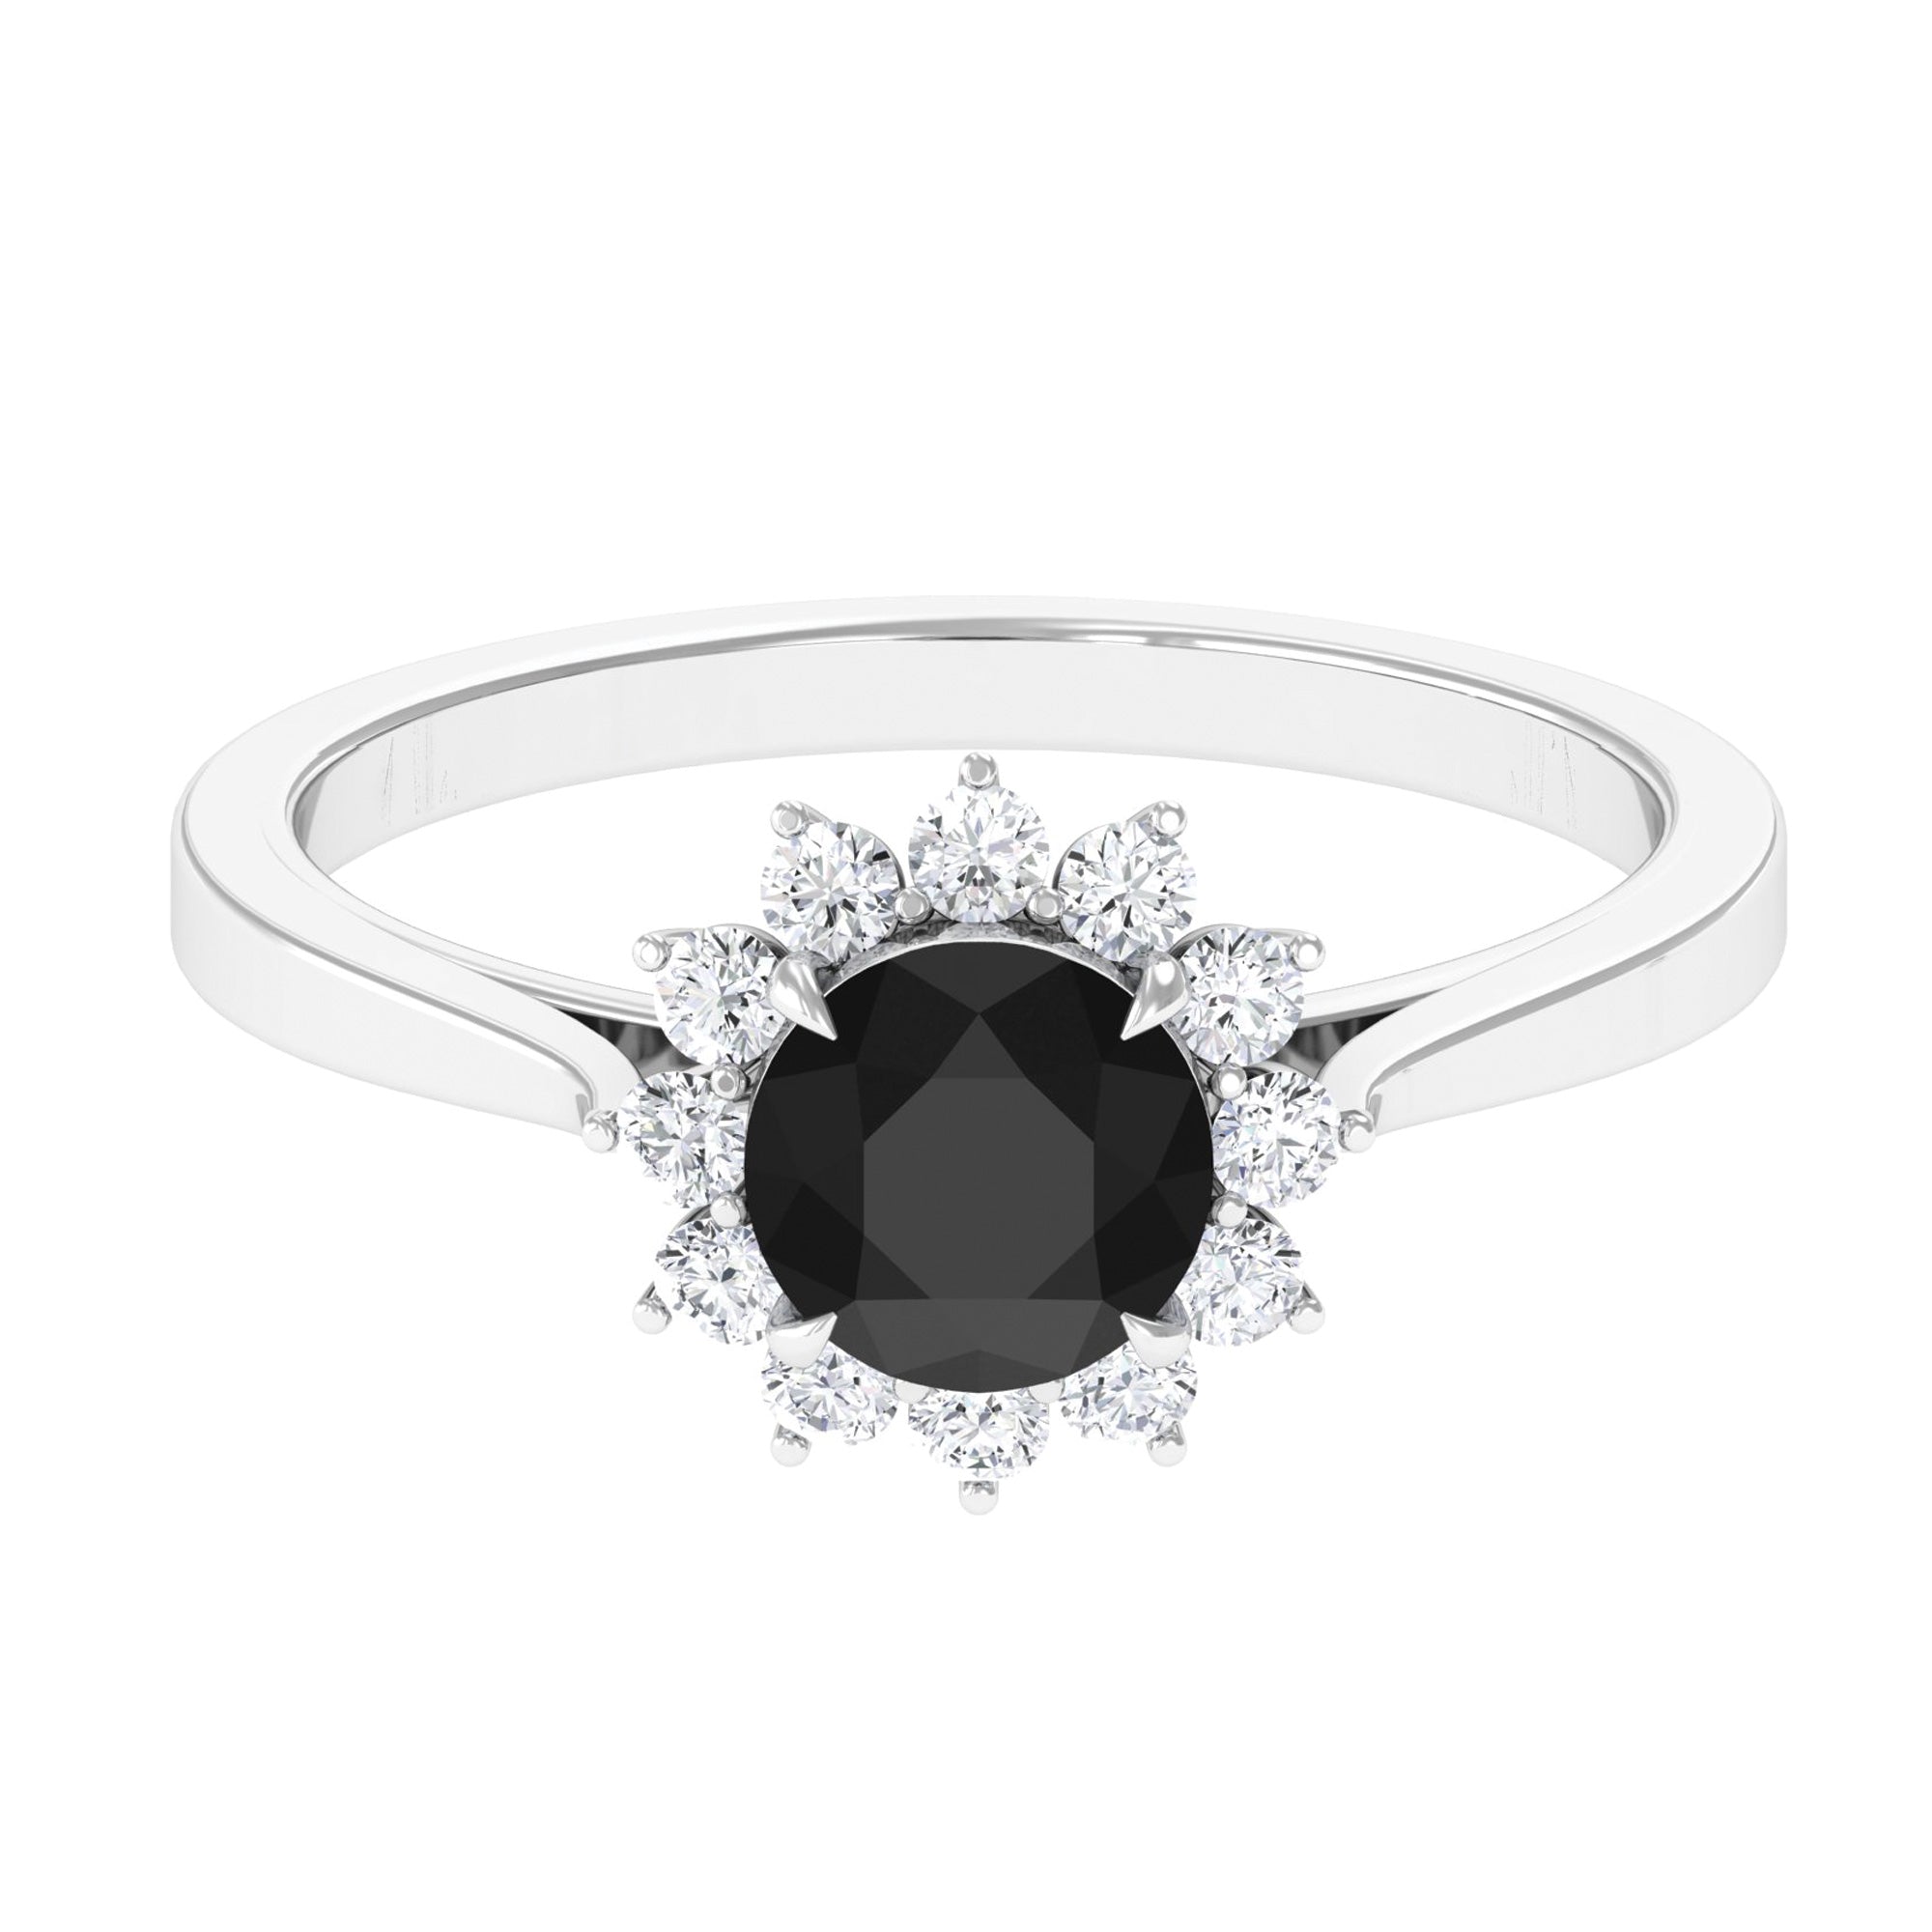 6 MM Black Onyx Engagement Ring with Diamond Accent Black Onyx - ( AAA ) - Quality - Rosec Jewels